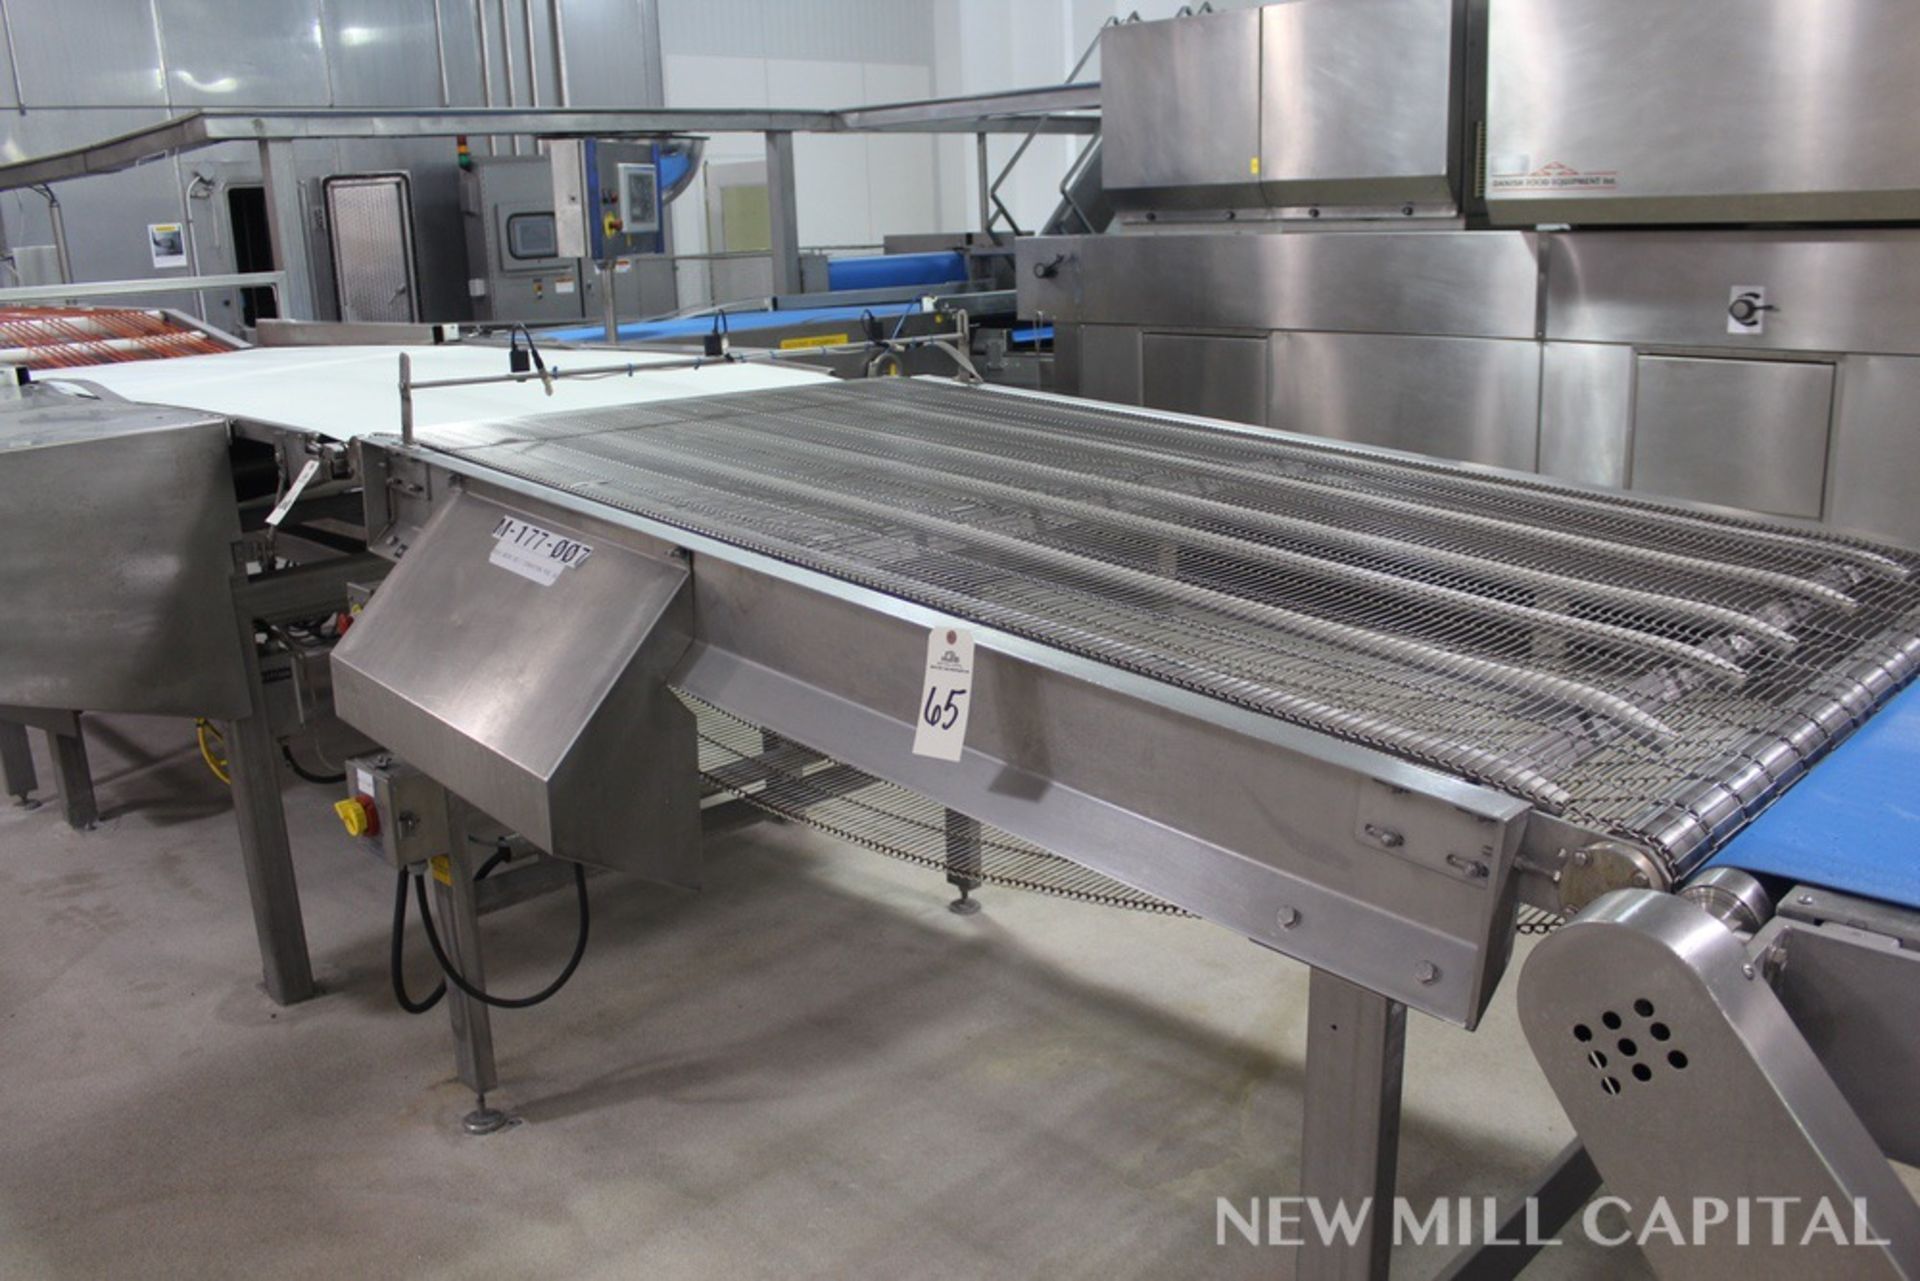 47" X 88" Wire Mesh Belt Conveyor Section | Rigging Fee: $100